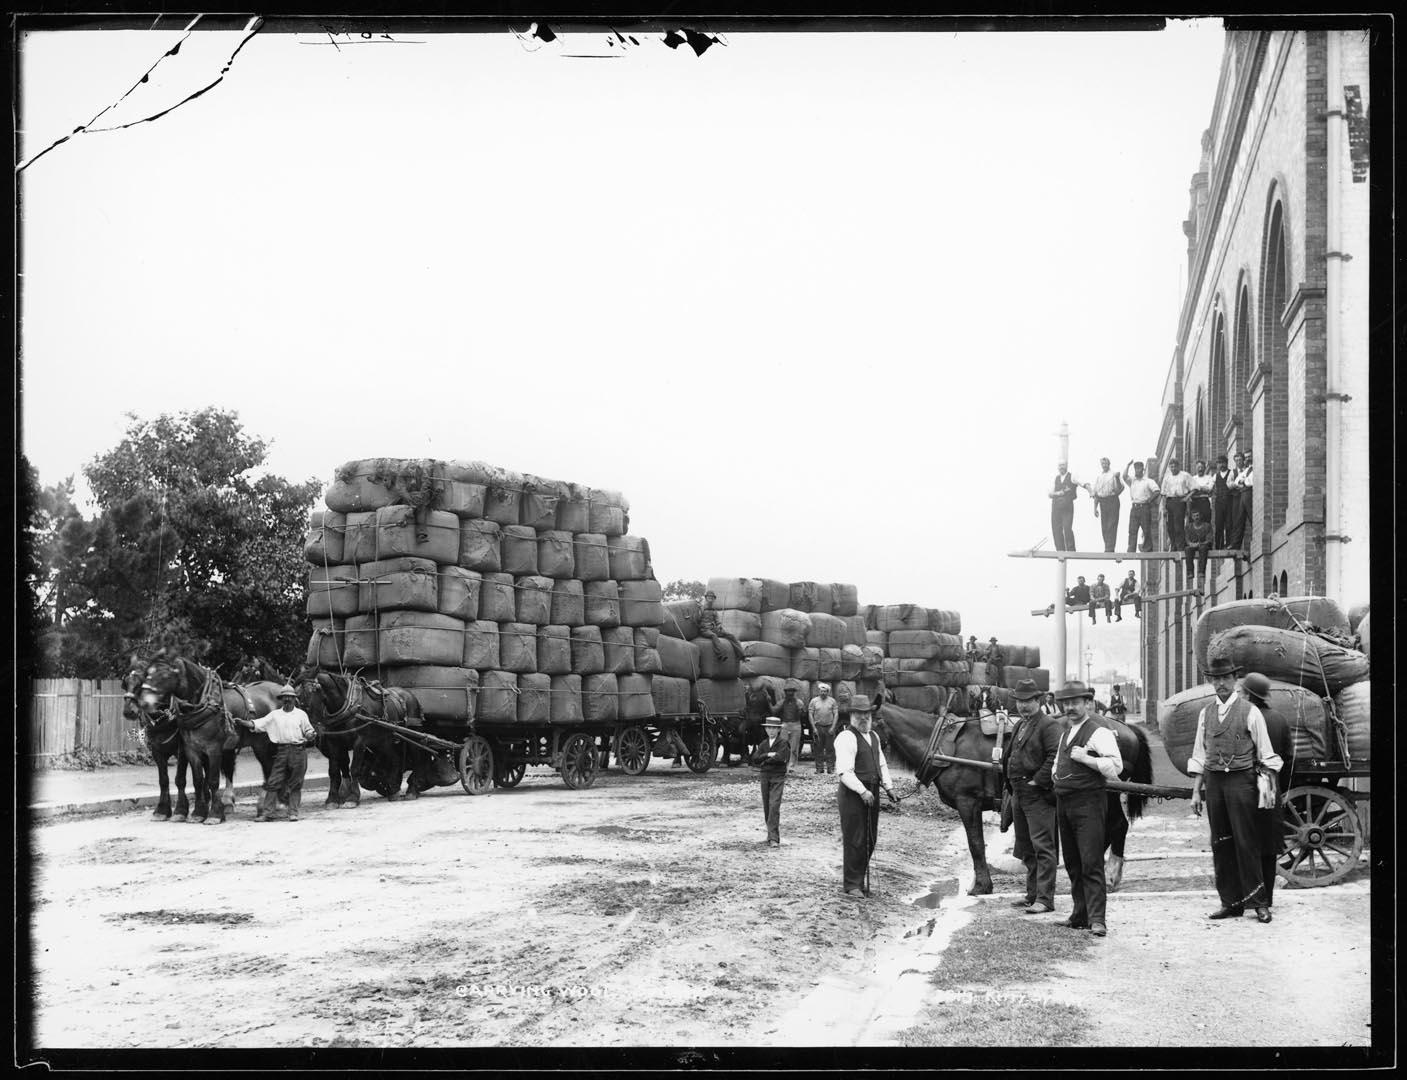 Loading wool at Winchcombe Carson woolstore, Pyrmont, 1897 (Photograph: Charles Kerry Studio / Tyrrell Collection, Museum of Applied Arts  and Sciences)